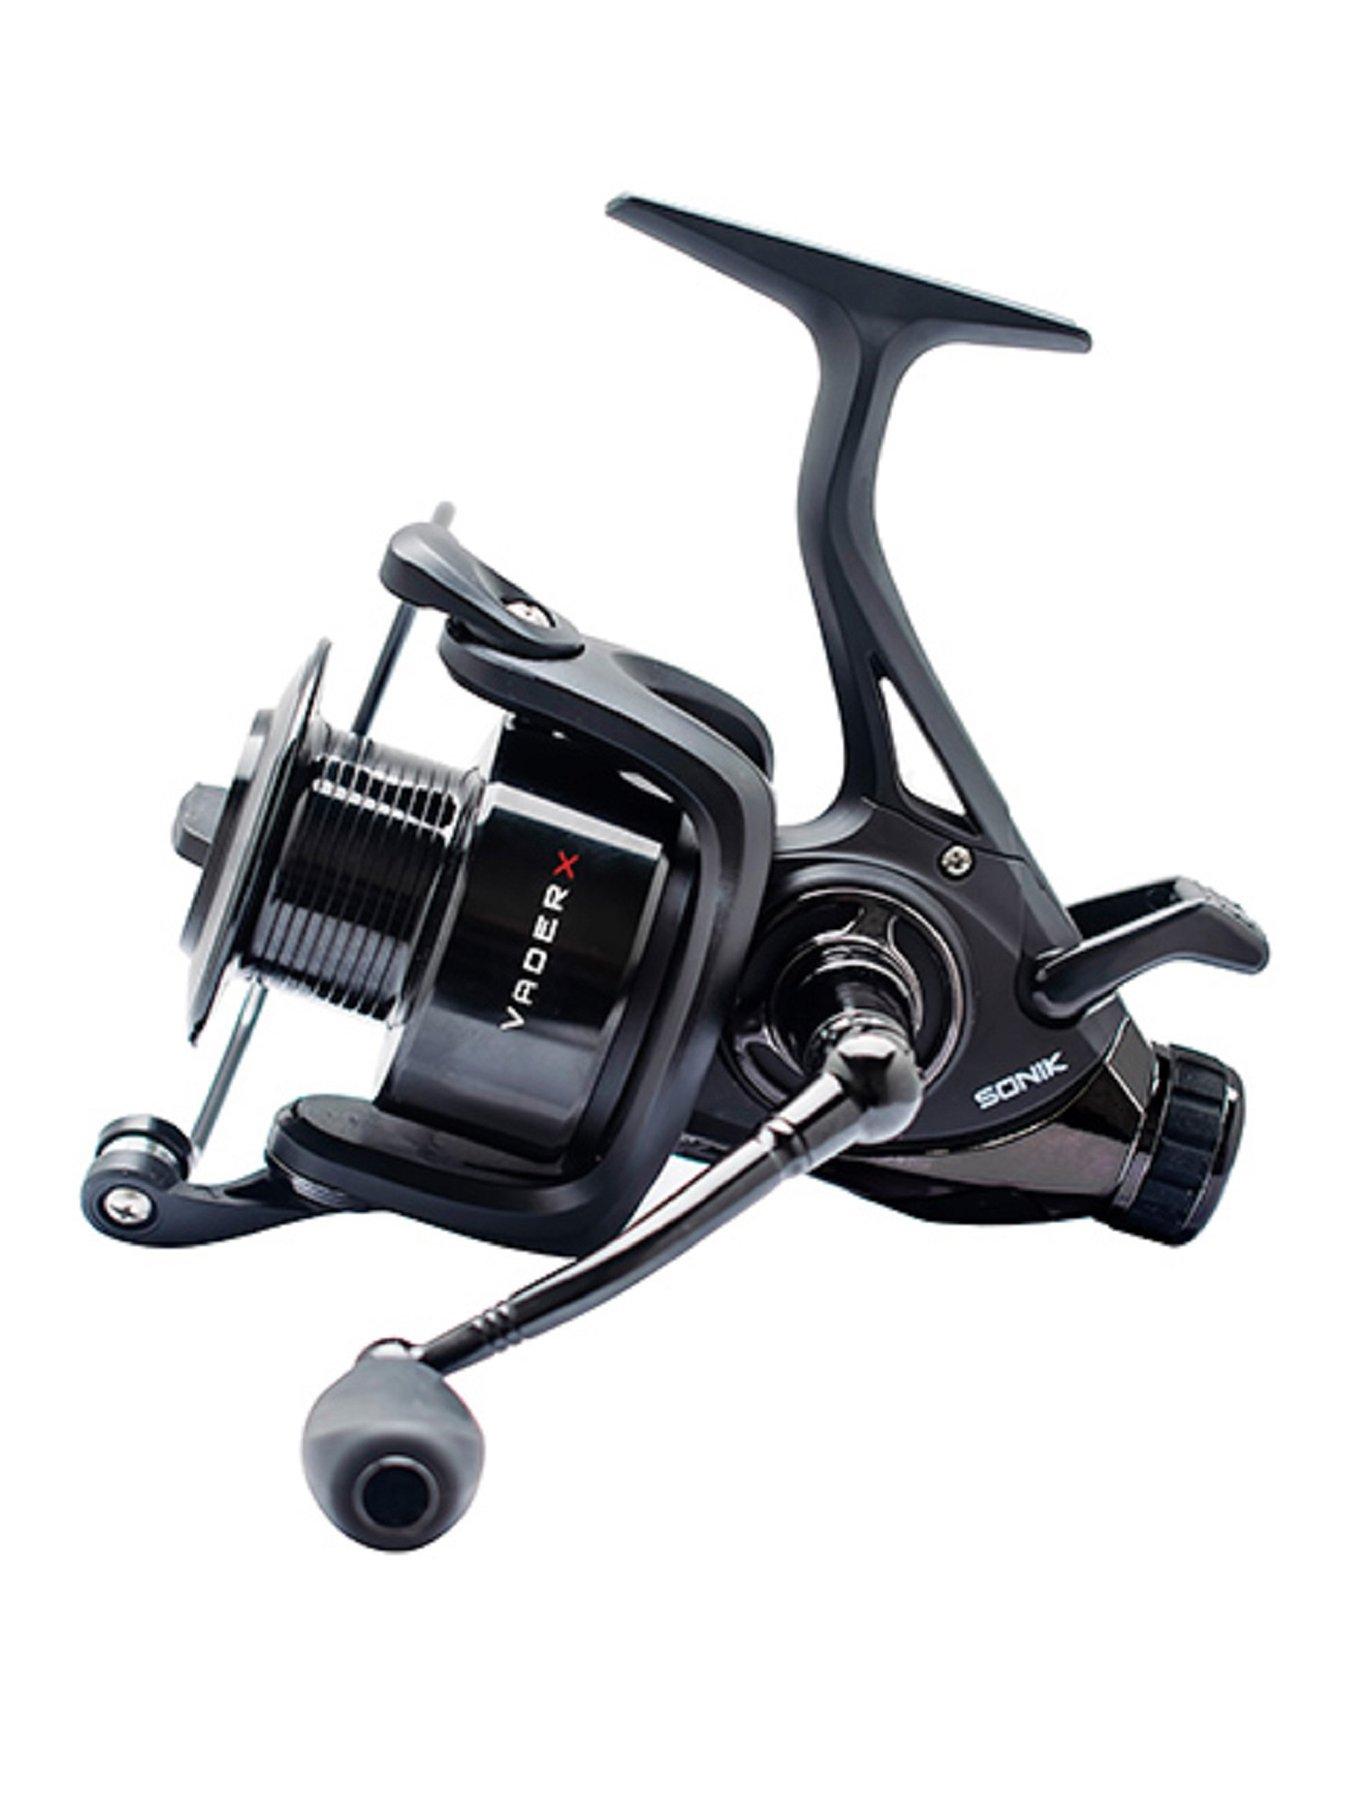 Sonik's new spod partners - the ultimate rod and reel combo